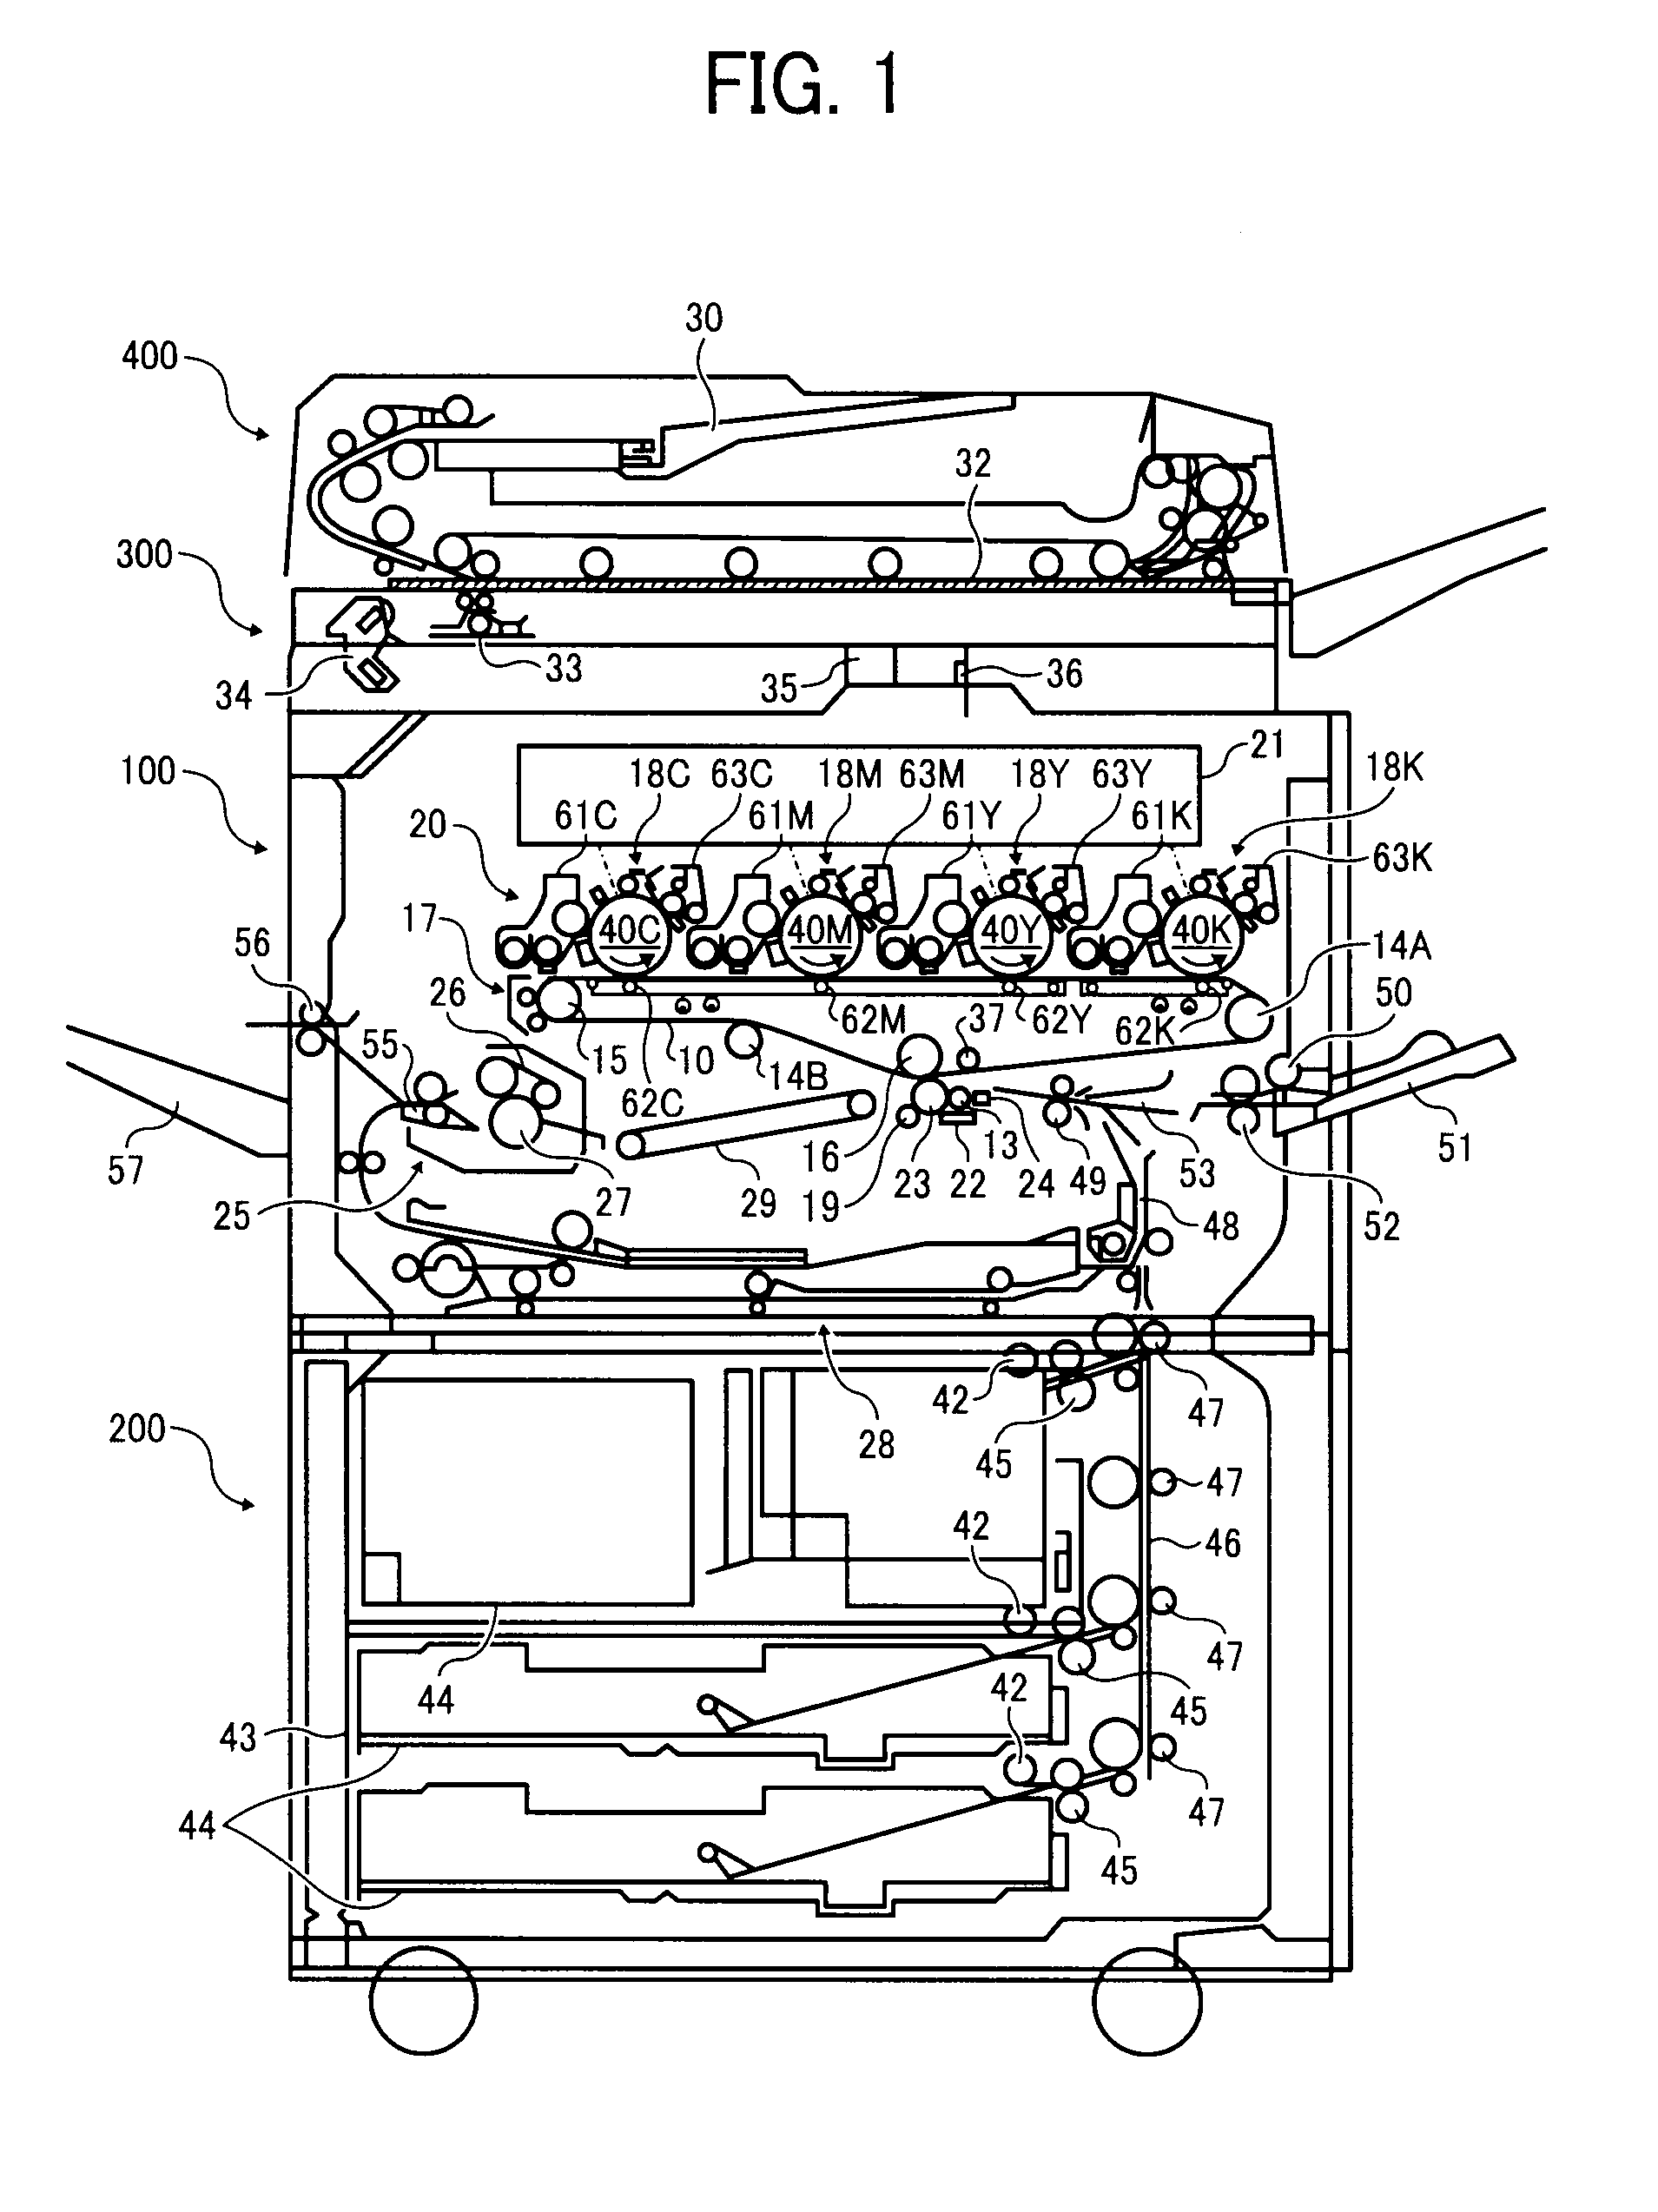 Transfer device and image forming apparatus using same